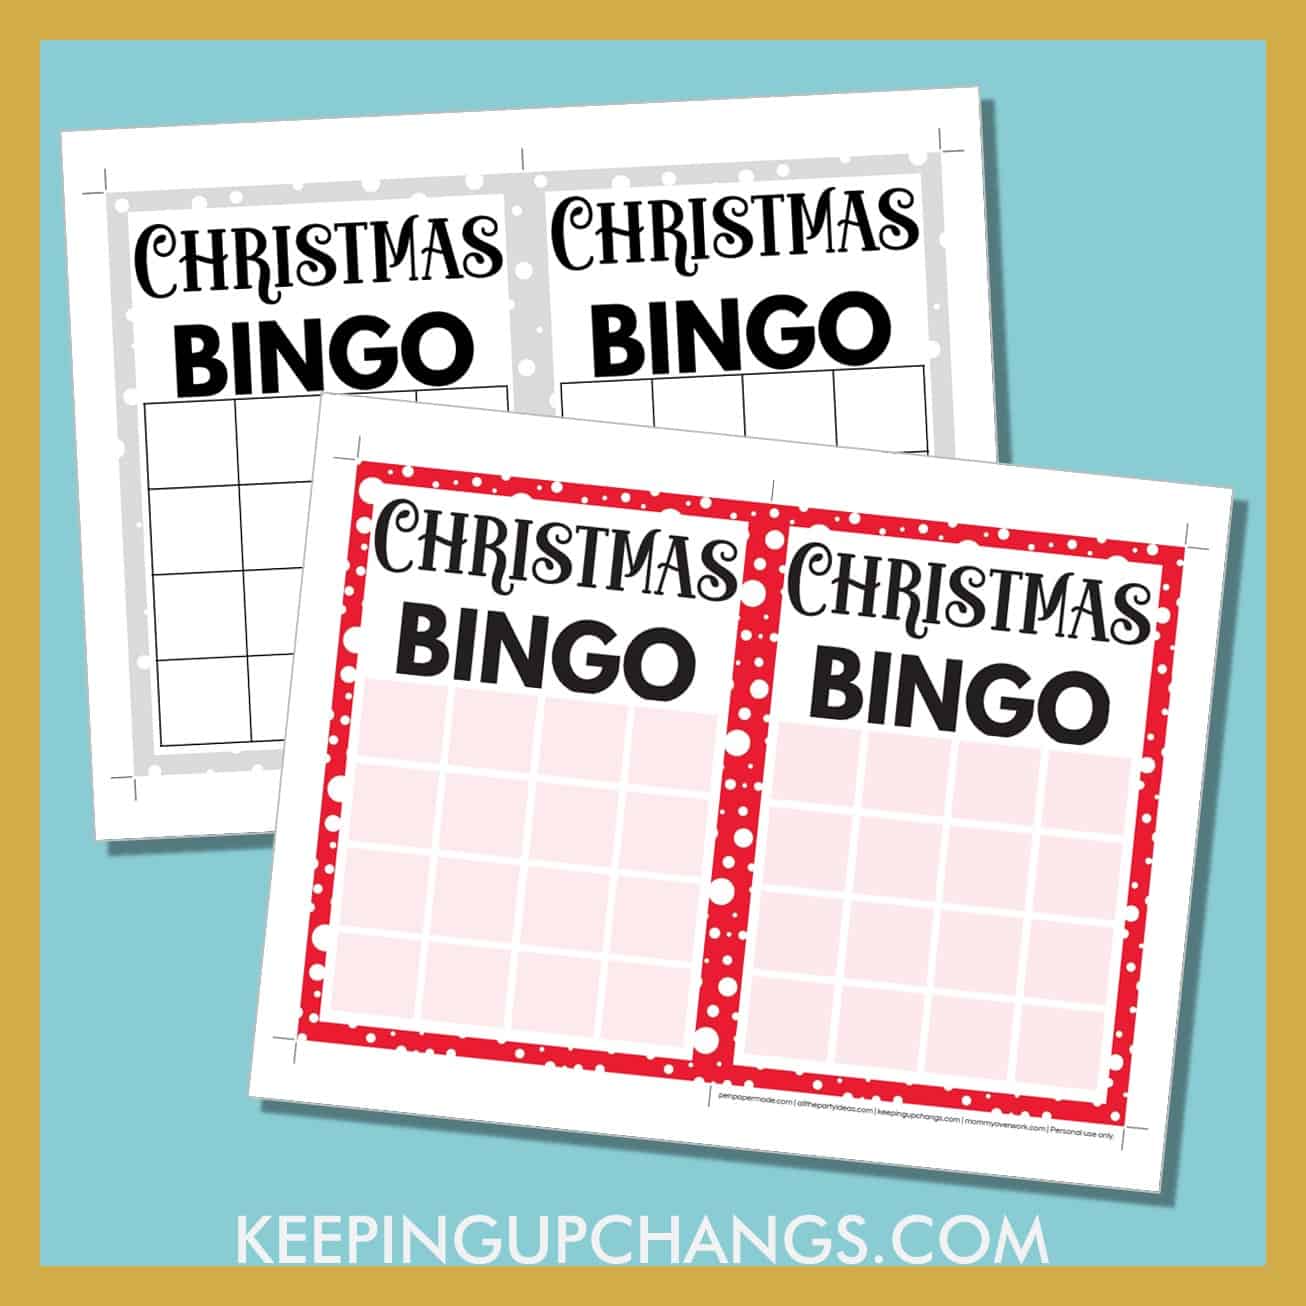 free christmas bingo 4x4 grid game board blank template in color, black and white.